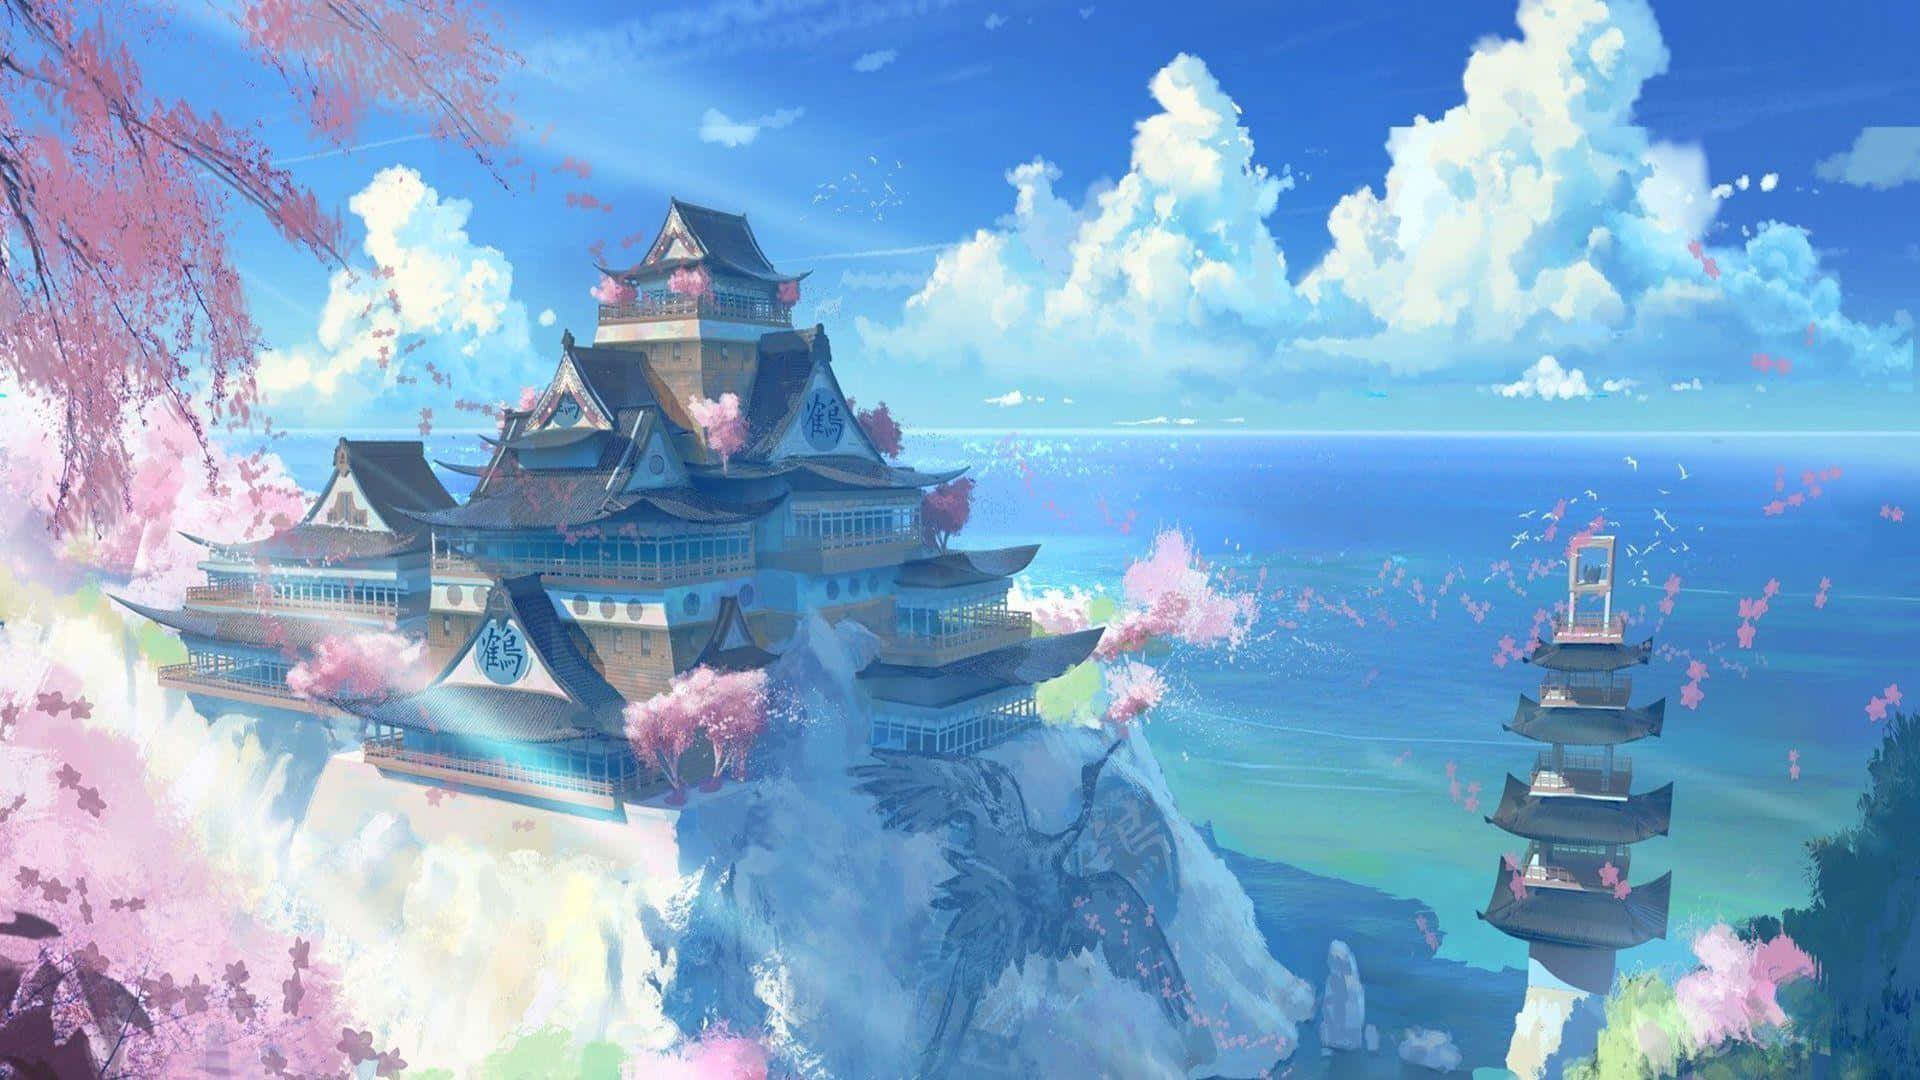 A Beautiful Anime Scenery Full Of Colorful Things And Imagination Background